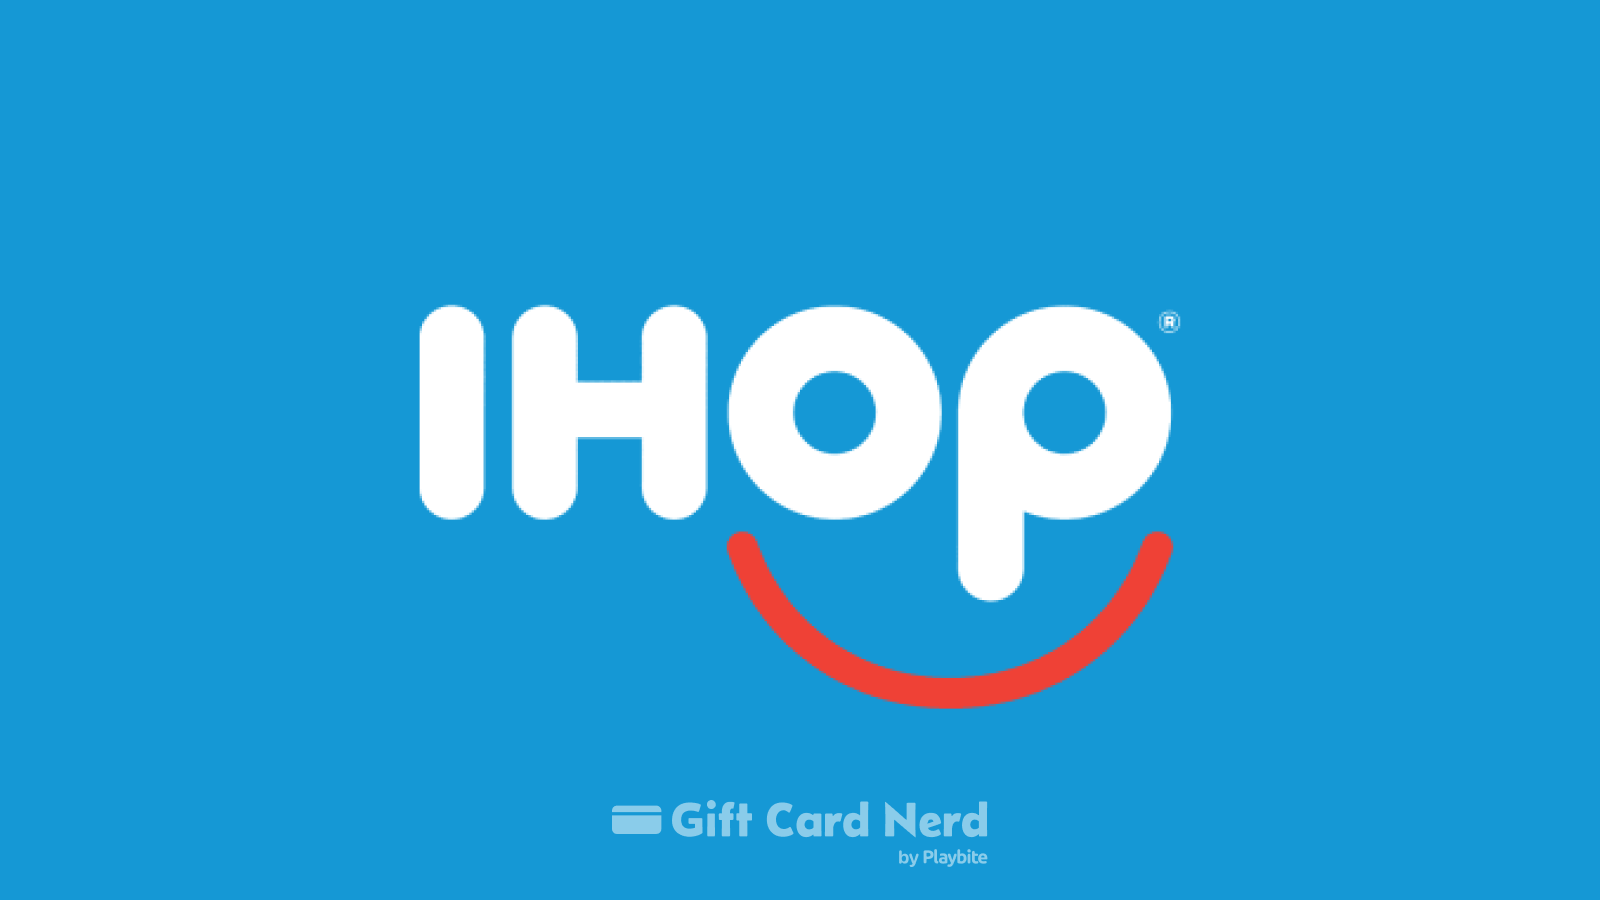 Does Target sell IHOP Gift Cards?